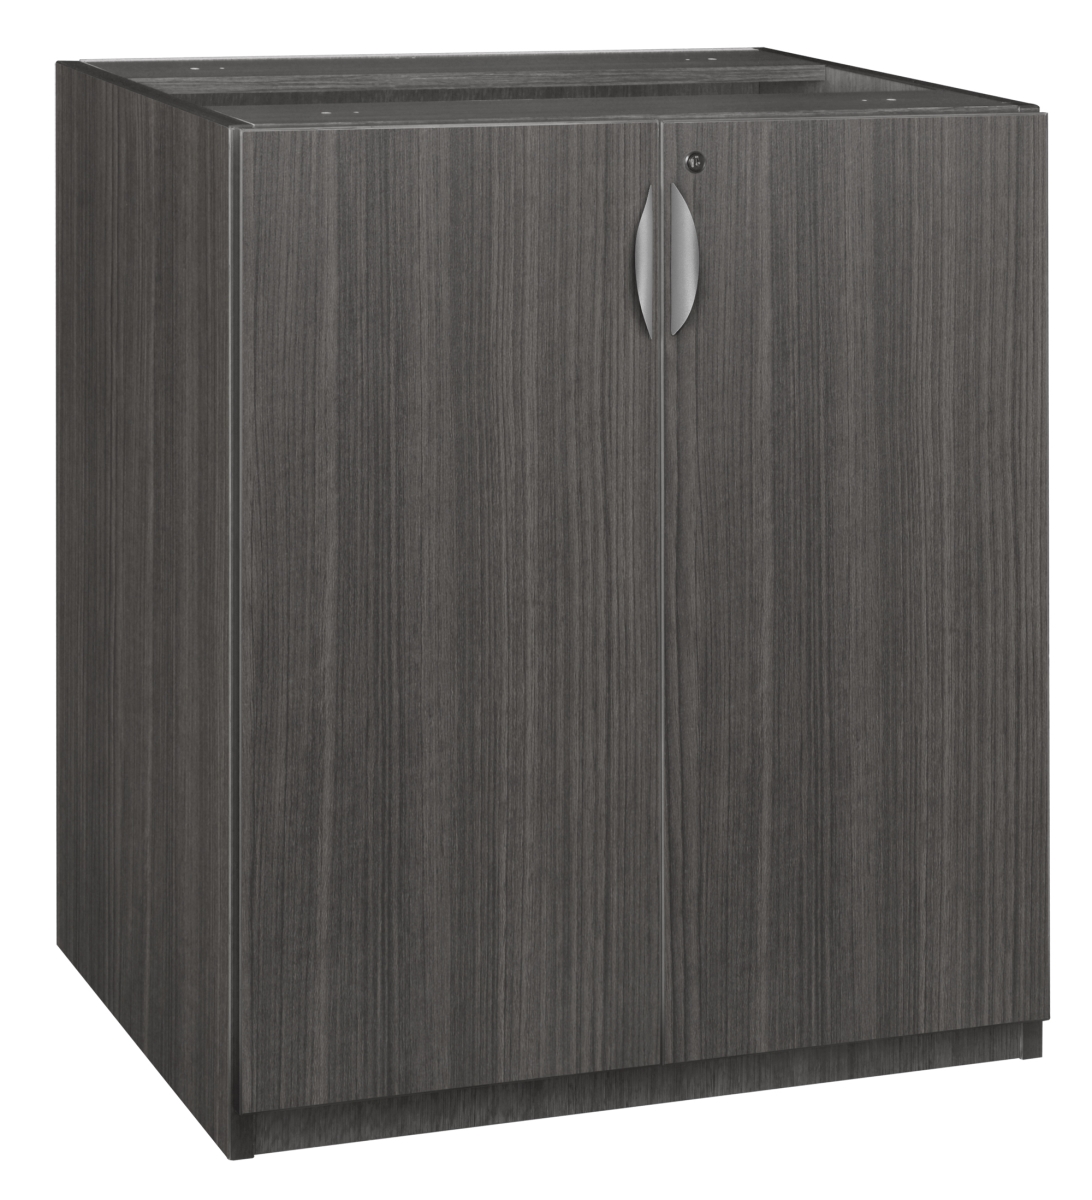 Lsc4136ag Legacy Stand Up Storage Cabinet Without Top, Ash Grey